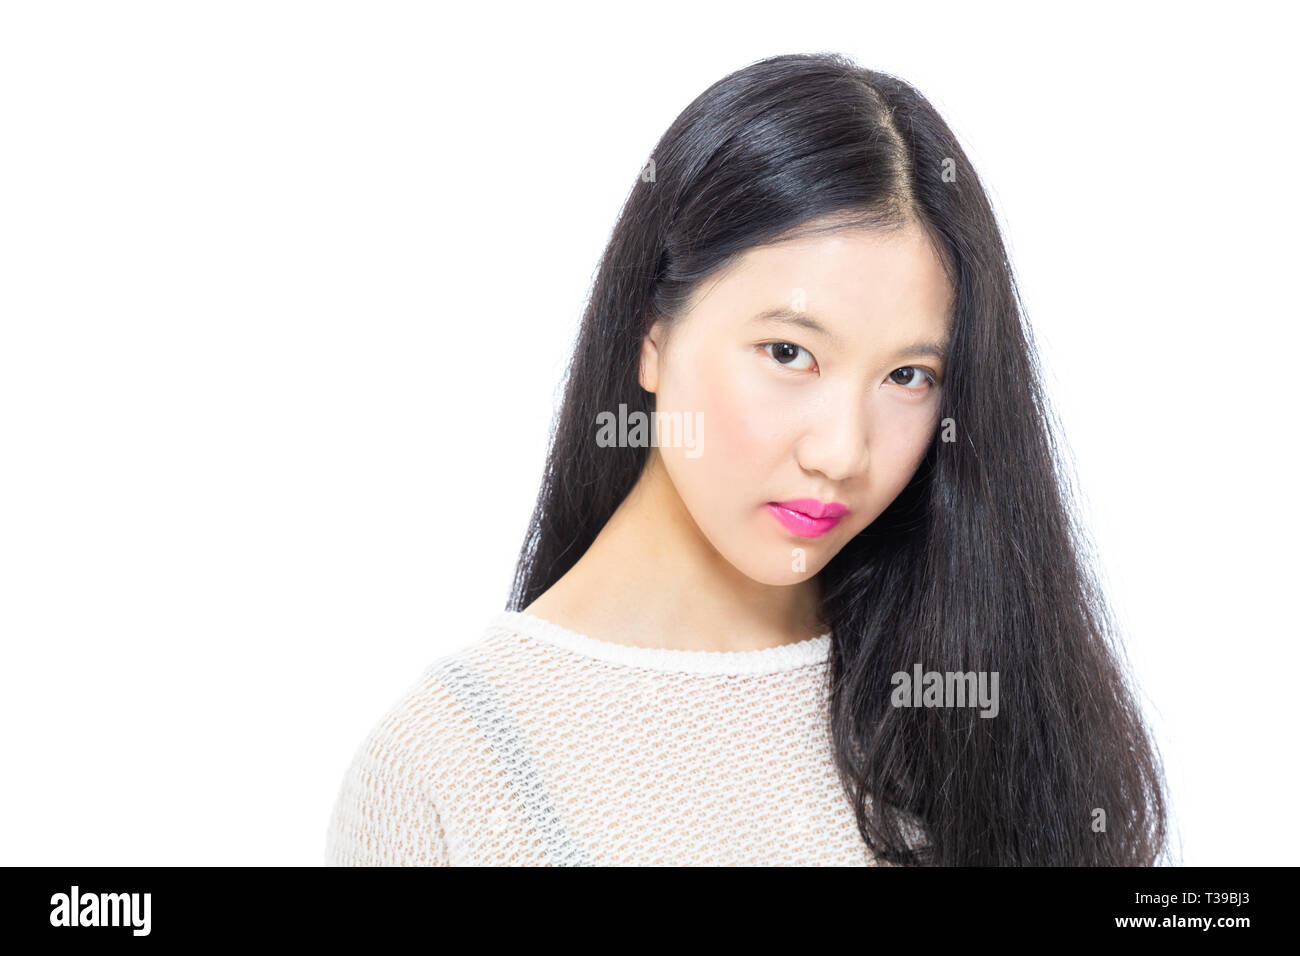 Teenage Asian high school girl portrait with hair hanging in front of half  face Stock Photo - Alamy